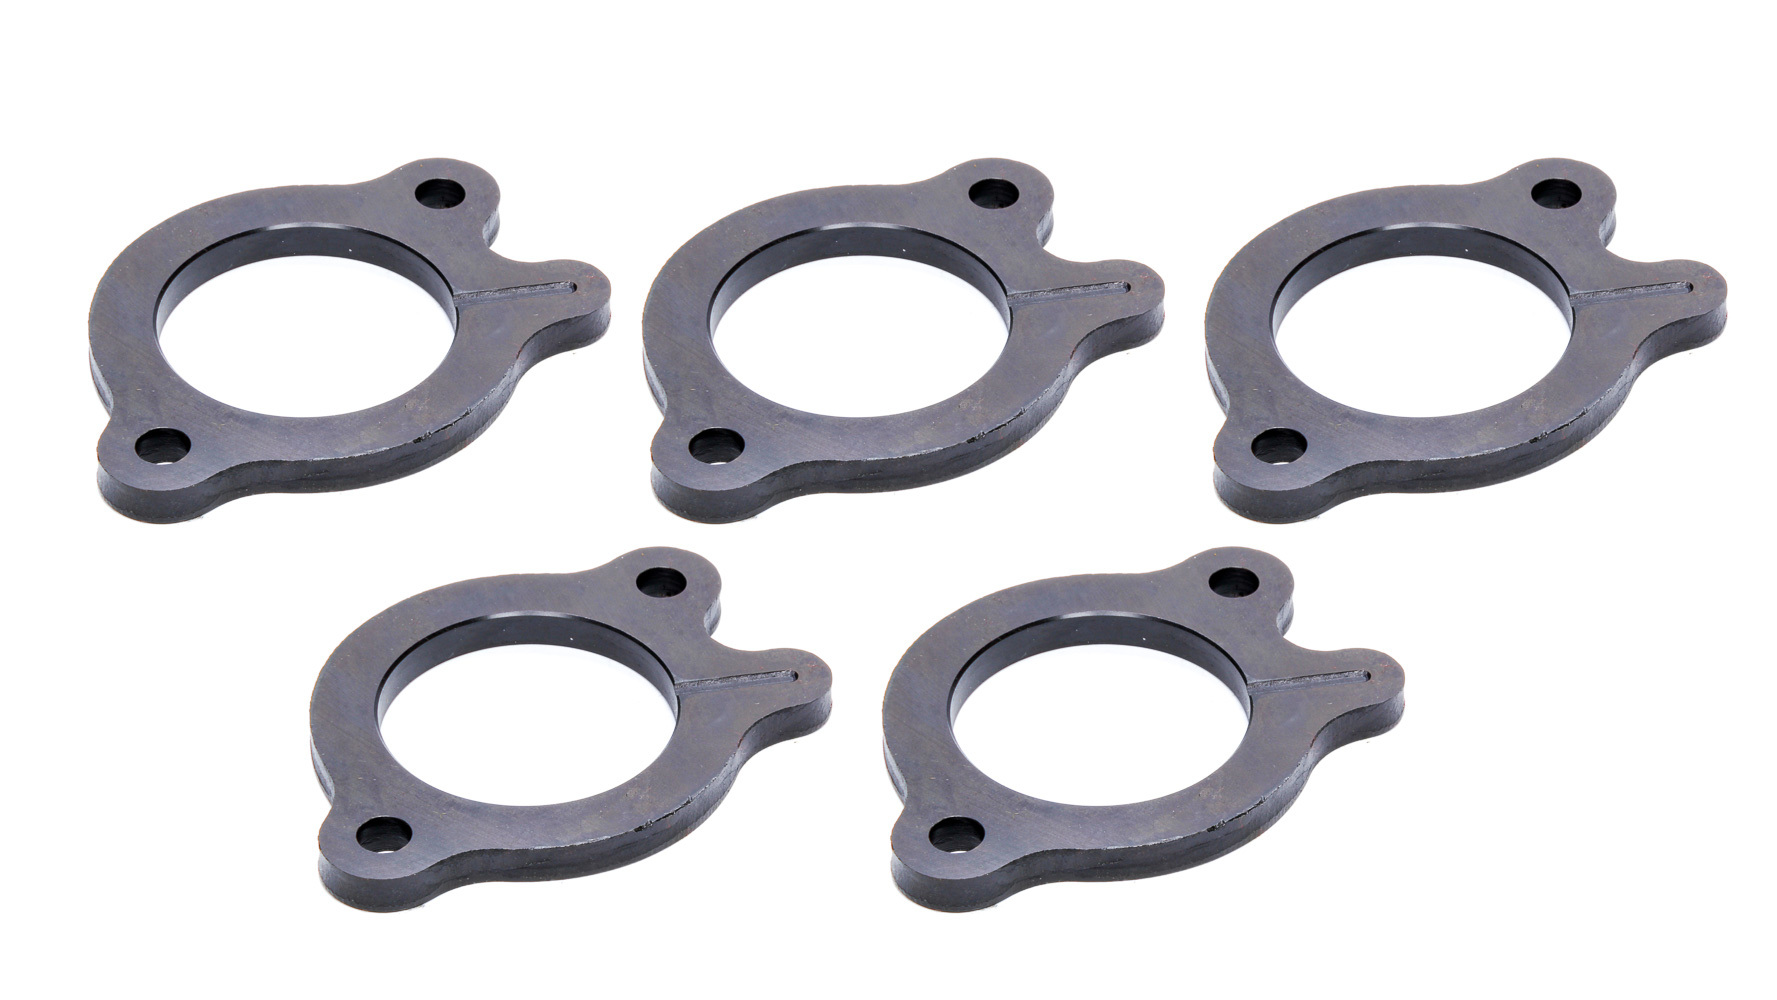 Enginequest CP302N Camshaft Thrust Plate, 0.252 in Thick, Steel, Black Oxide, Small Block Ford, Set of 5